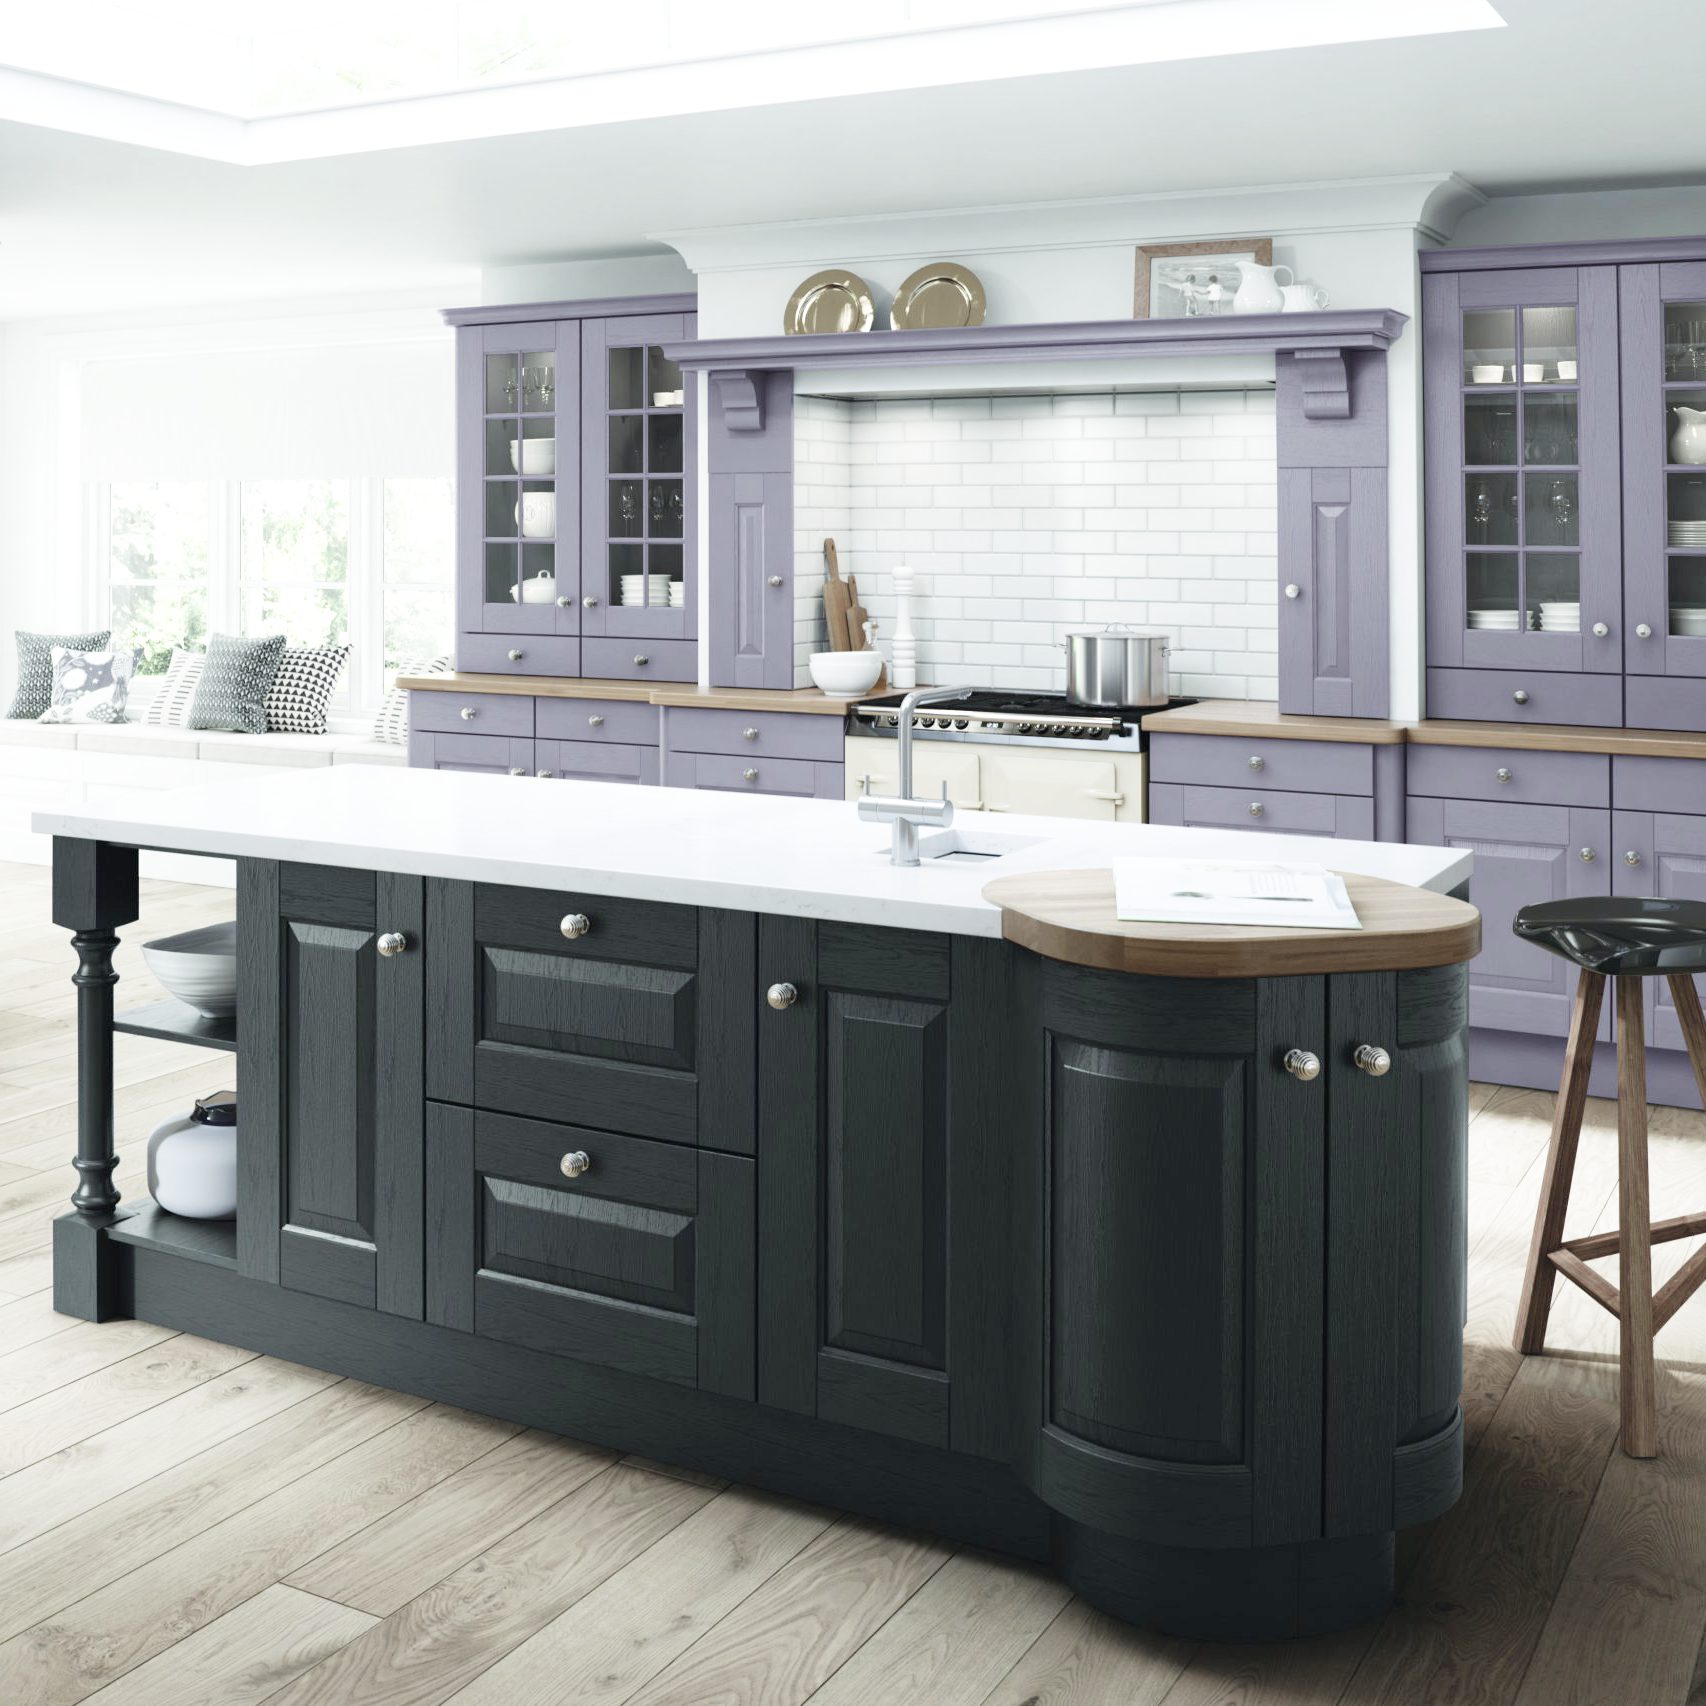 Solid ash shaker kitchen with centre island painted in dark grey and wall units in French lavender